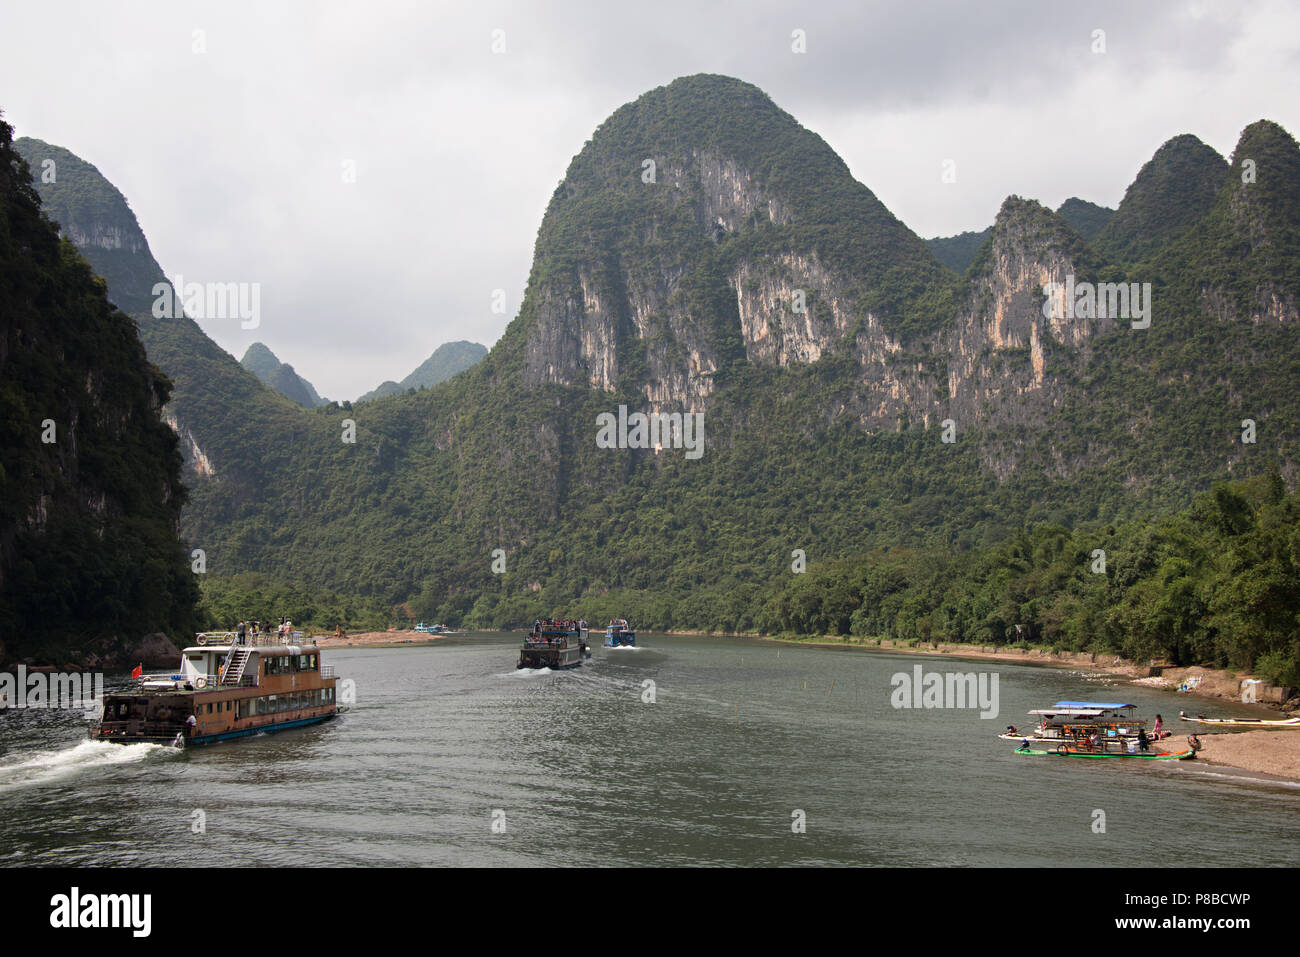 River boats on the Li River in Guangxi Zhuang china, on the journey from Guilin to Yangshuo. Stock Photo